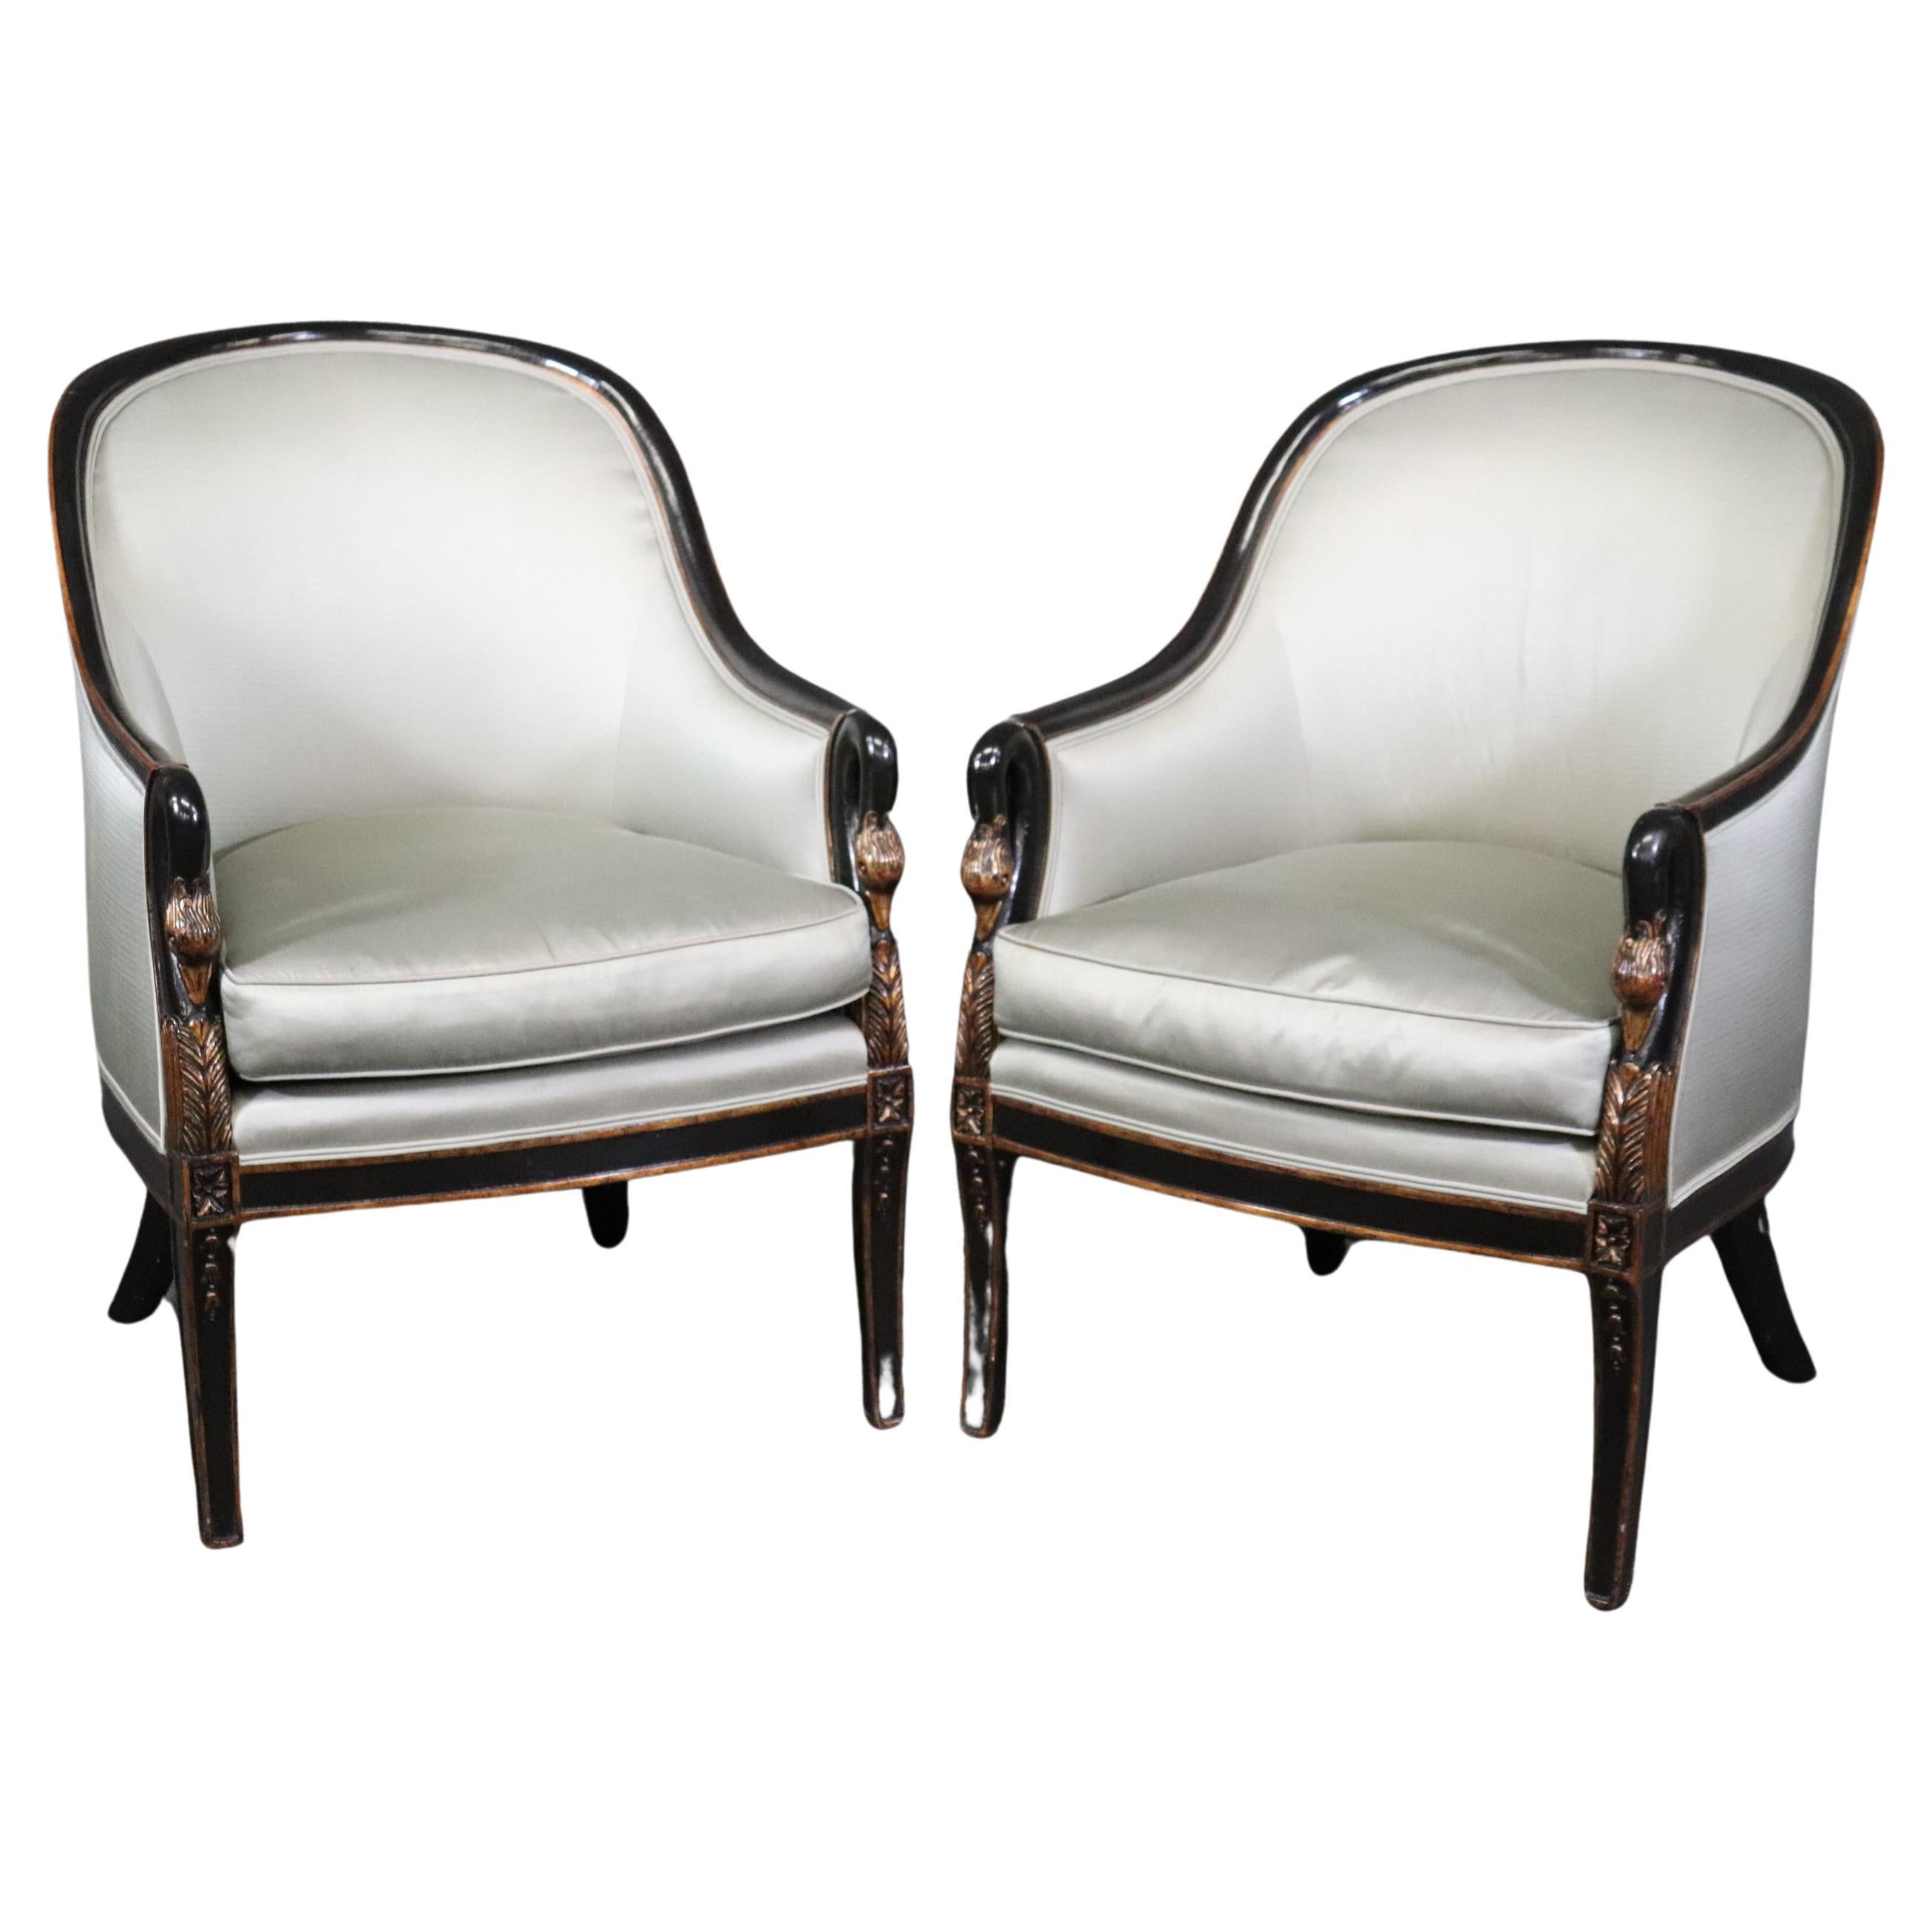 Pair of French Regency Style Ebonized Swan Bergeres Armchairs